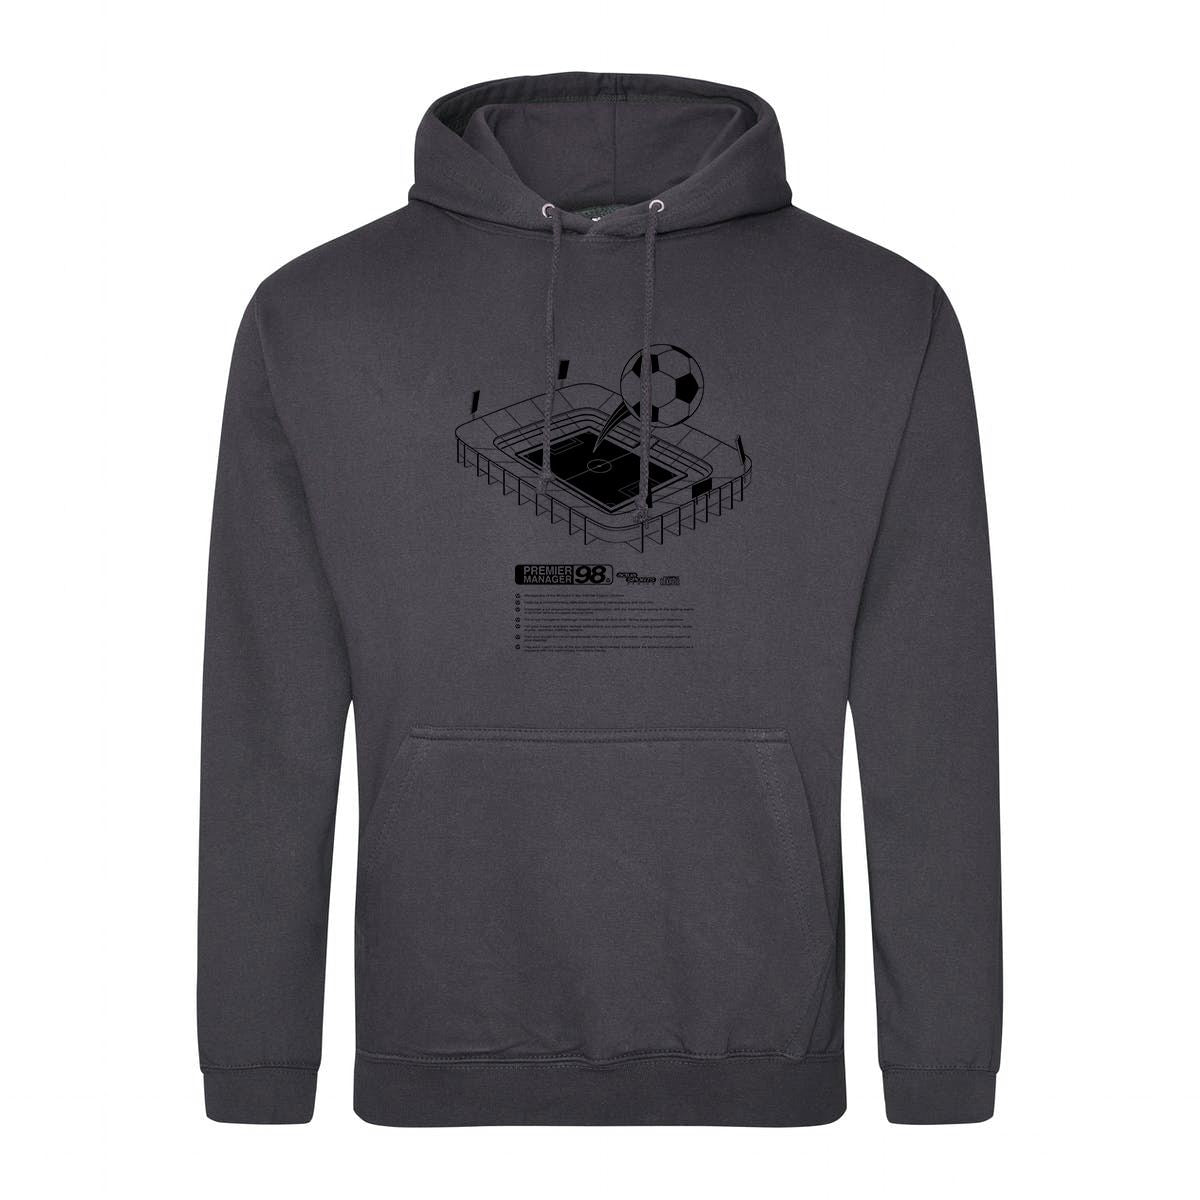 Premier Manager Retro Gaming Hoodie Hoodie Seven Squared Small 36" Chest Storm Grey 